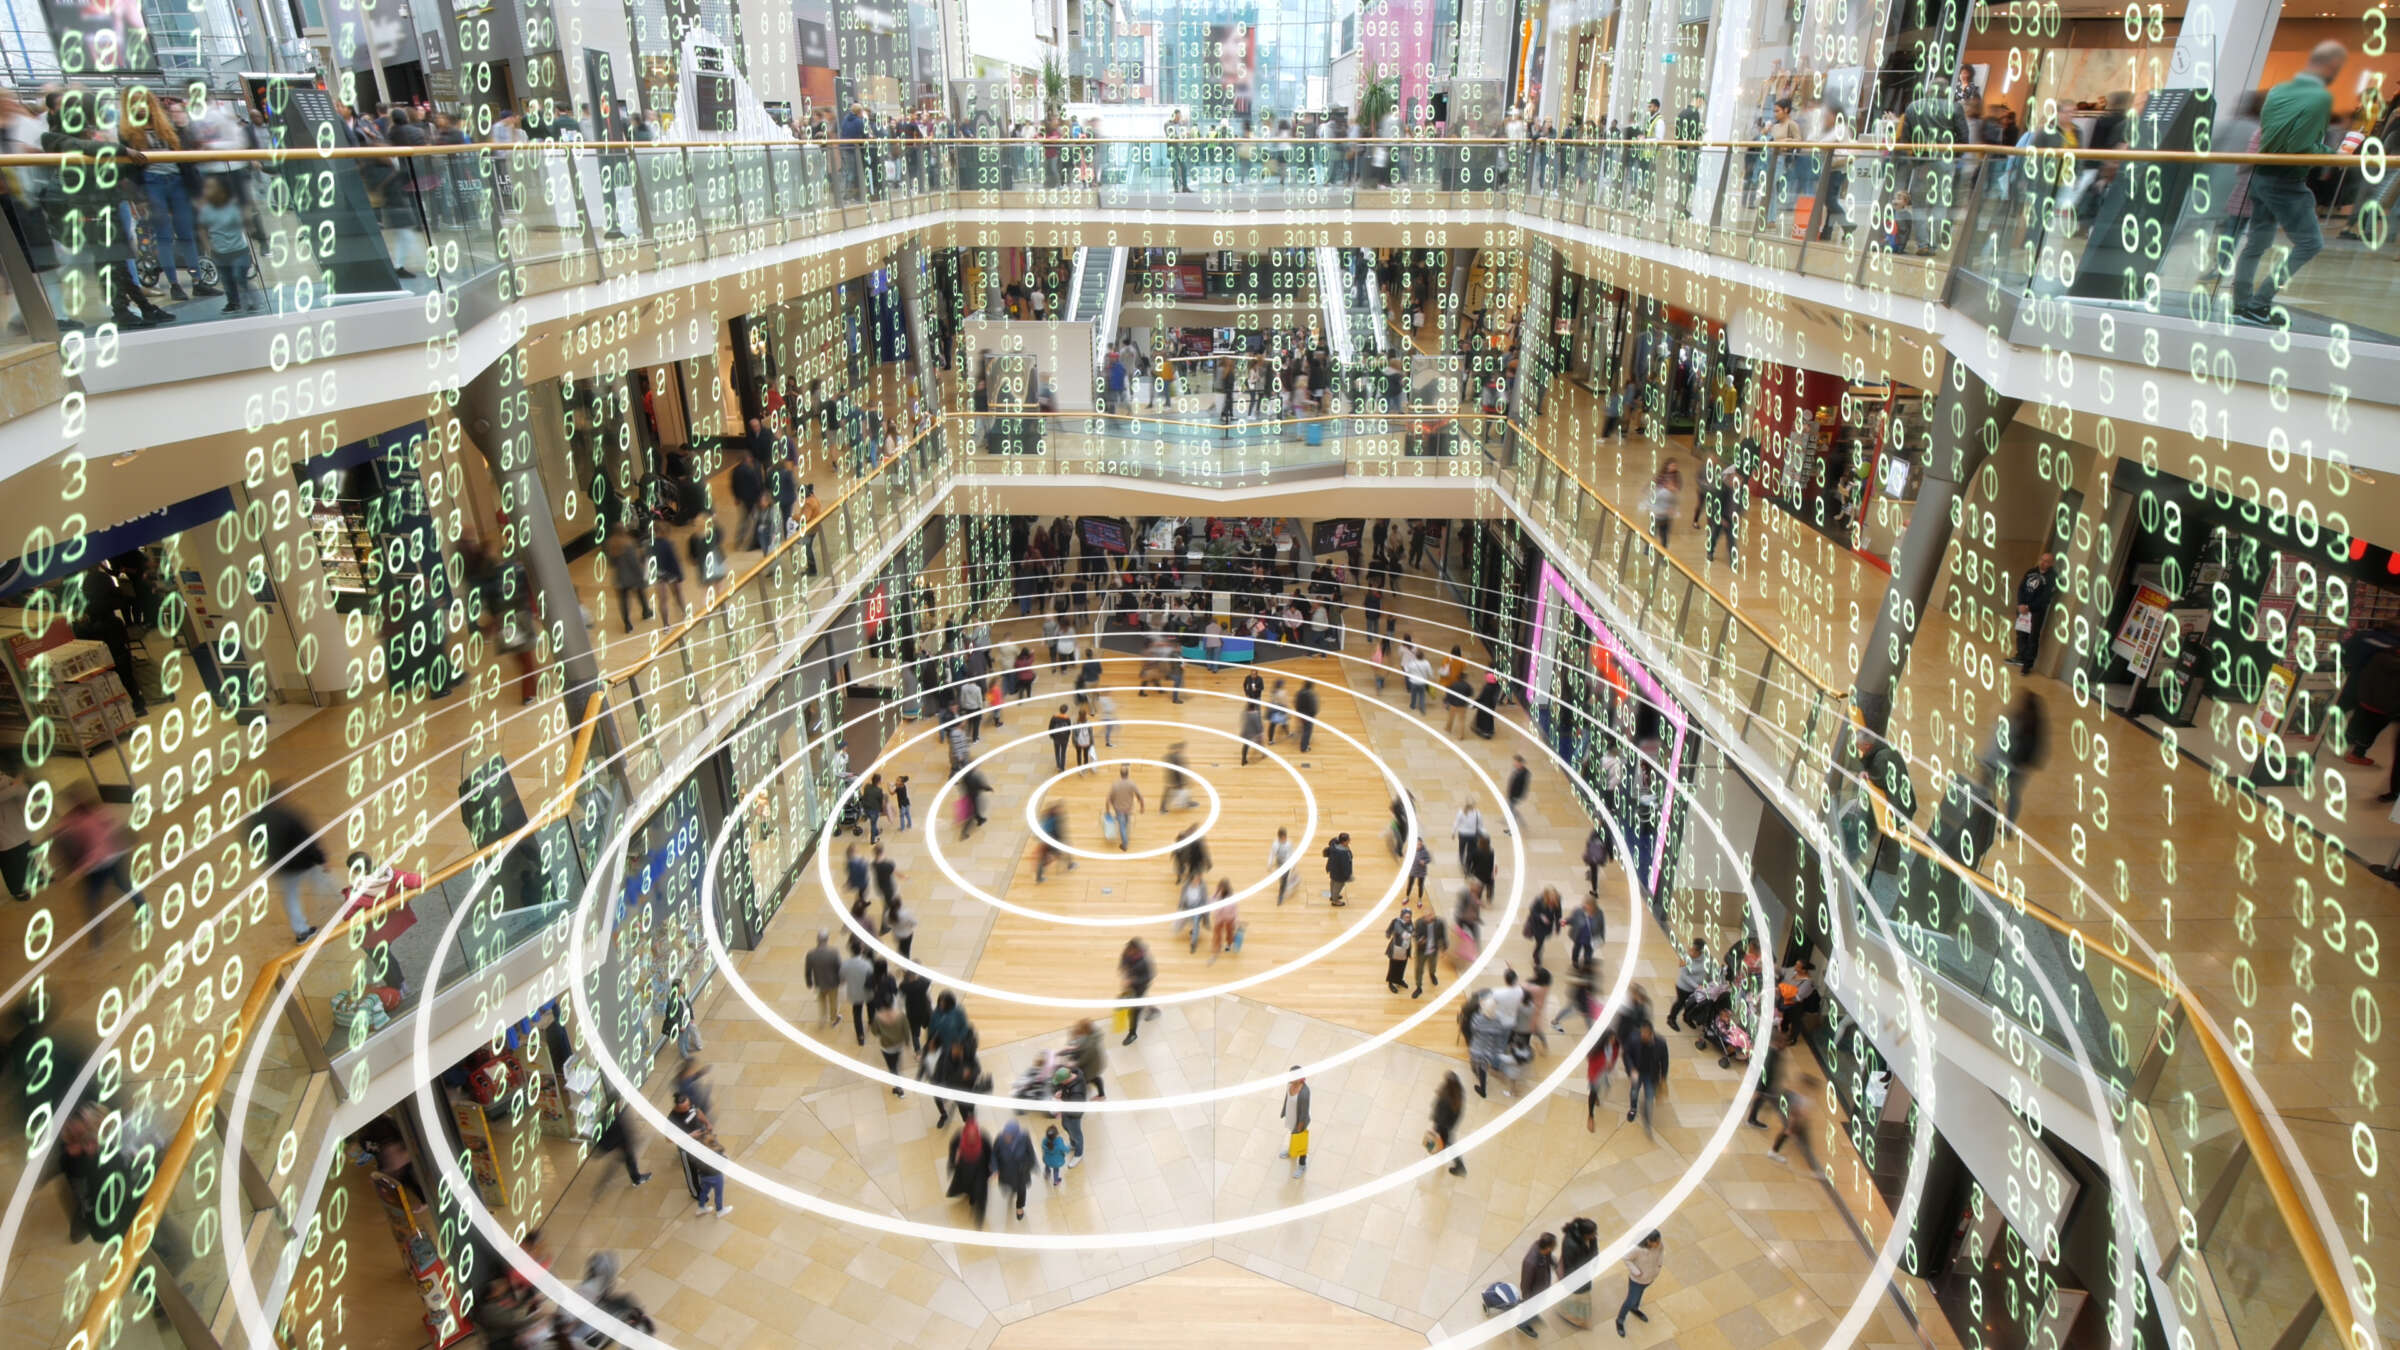 Background image: Shopping Mall and Data